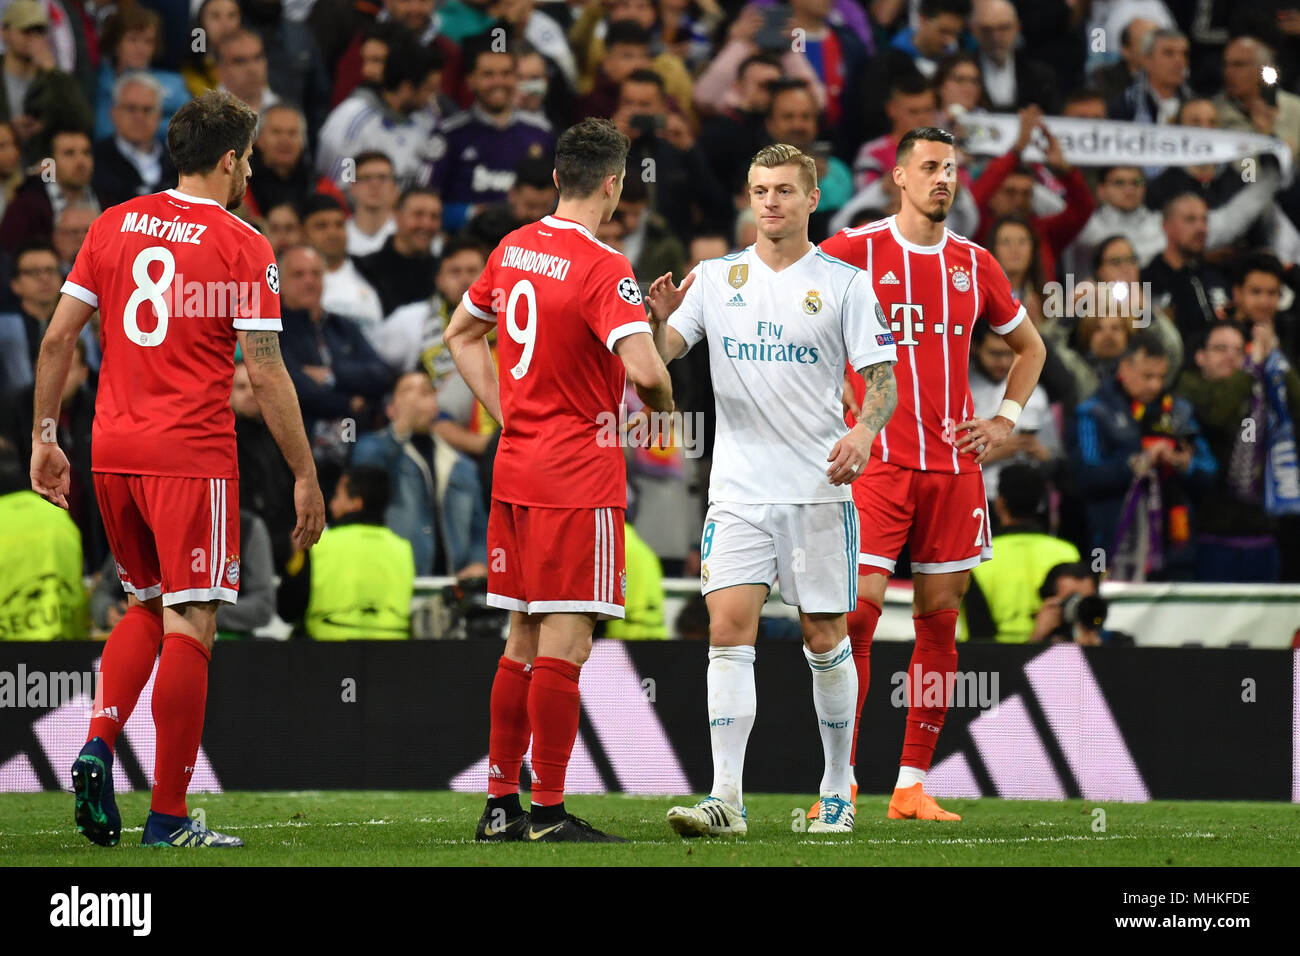 V Re Sandro Wagner Bayern Munich Toni Kroos Real Madrid Is Comforting Robert Lewandowski Fc Bayern Munich Javi Javier Martinez Fc Bayern Munich After The Game Disappointment Frustrated Disappointed Frustratedriert Dejected Action